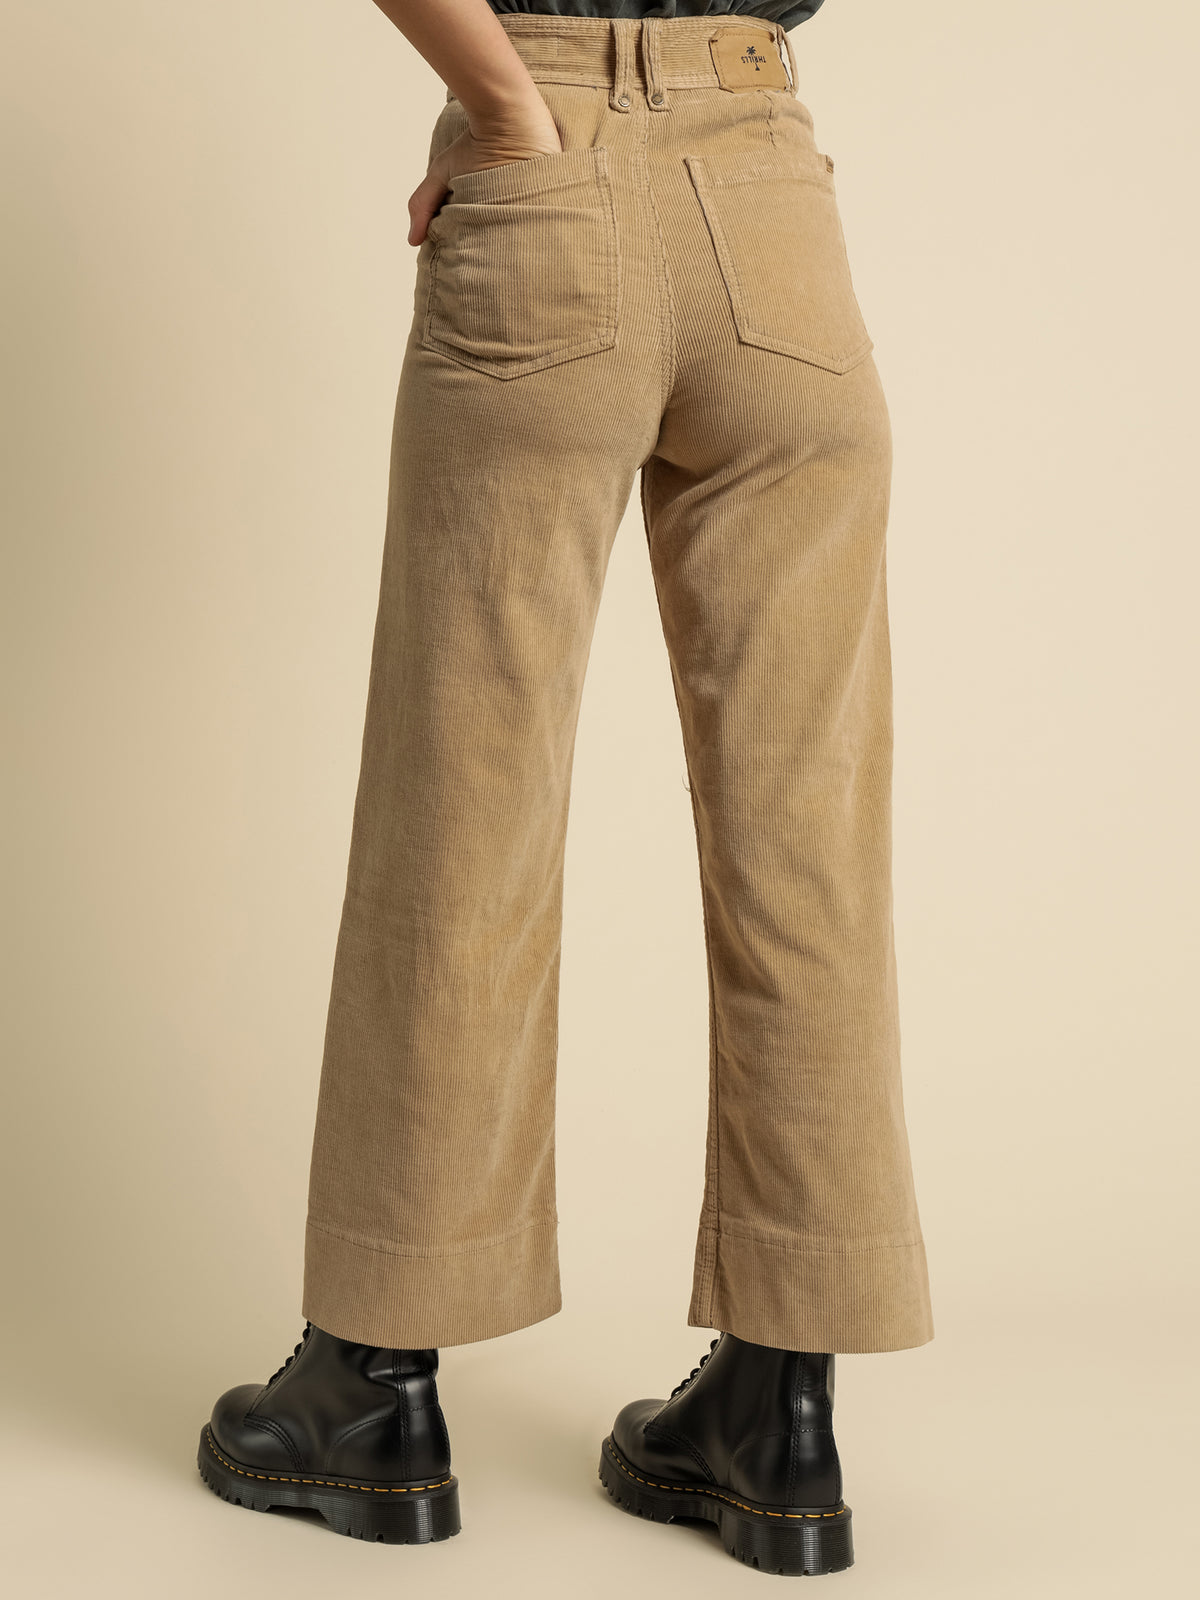 Belle Cord Pants in Sand